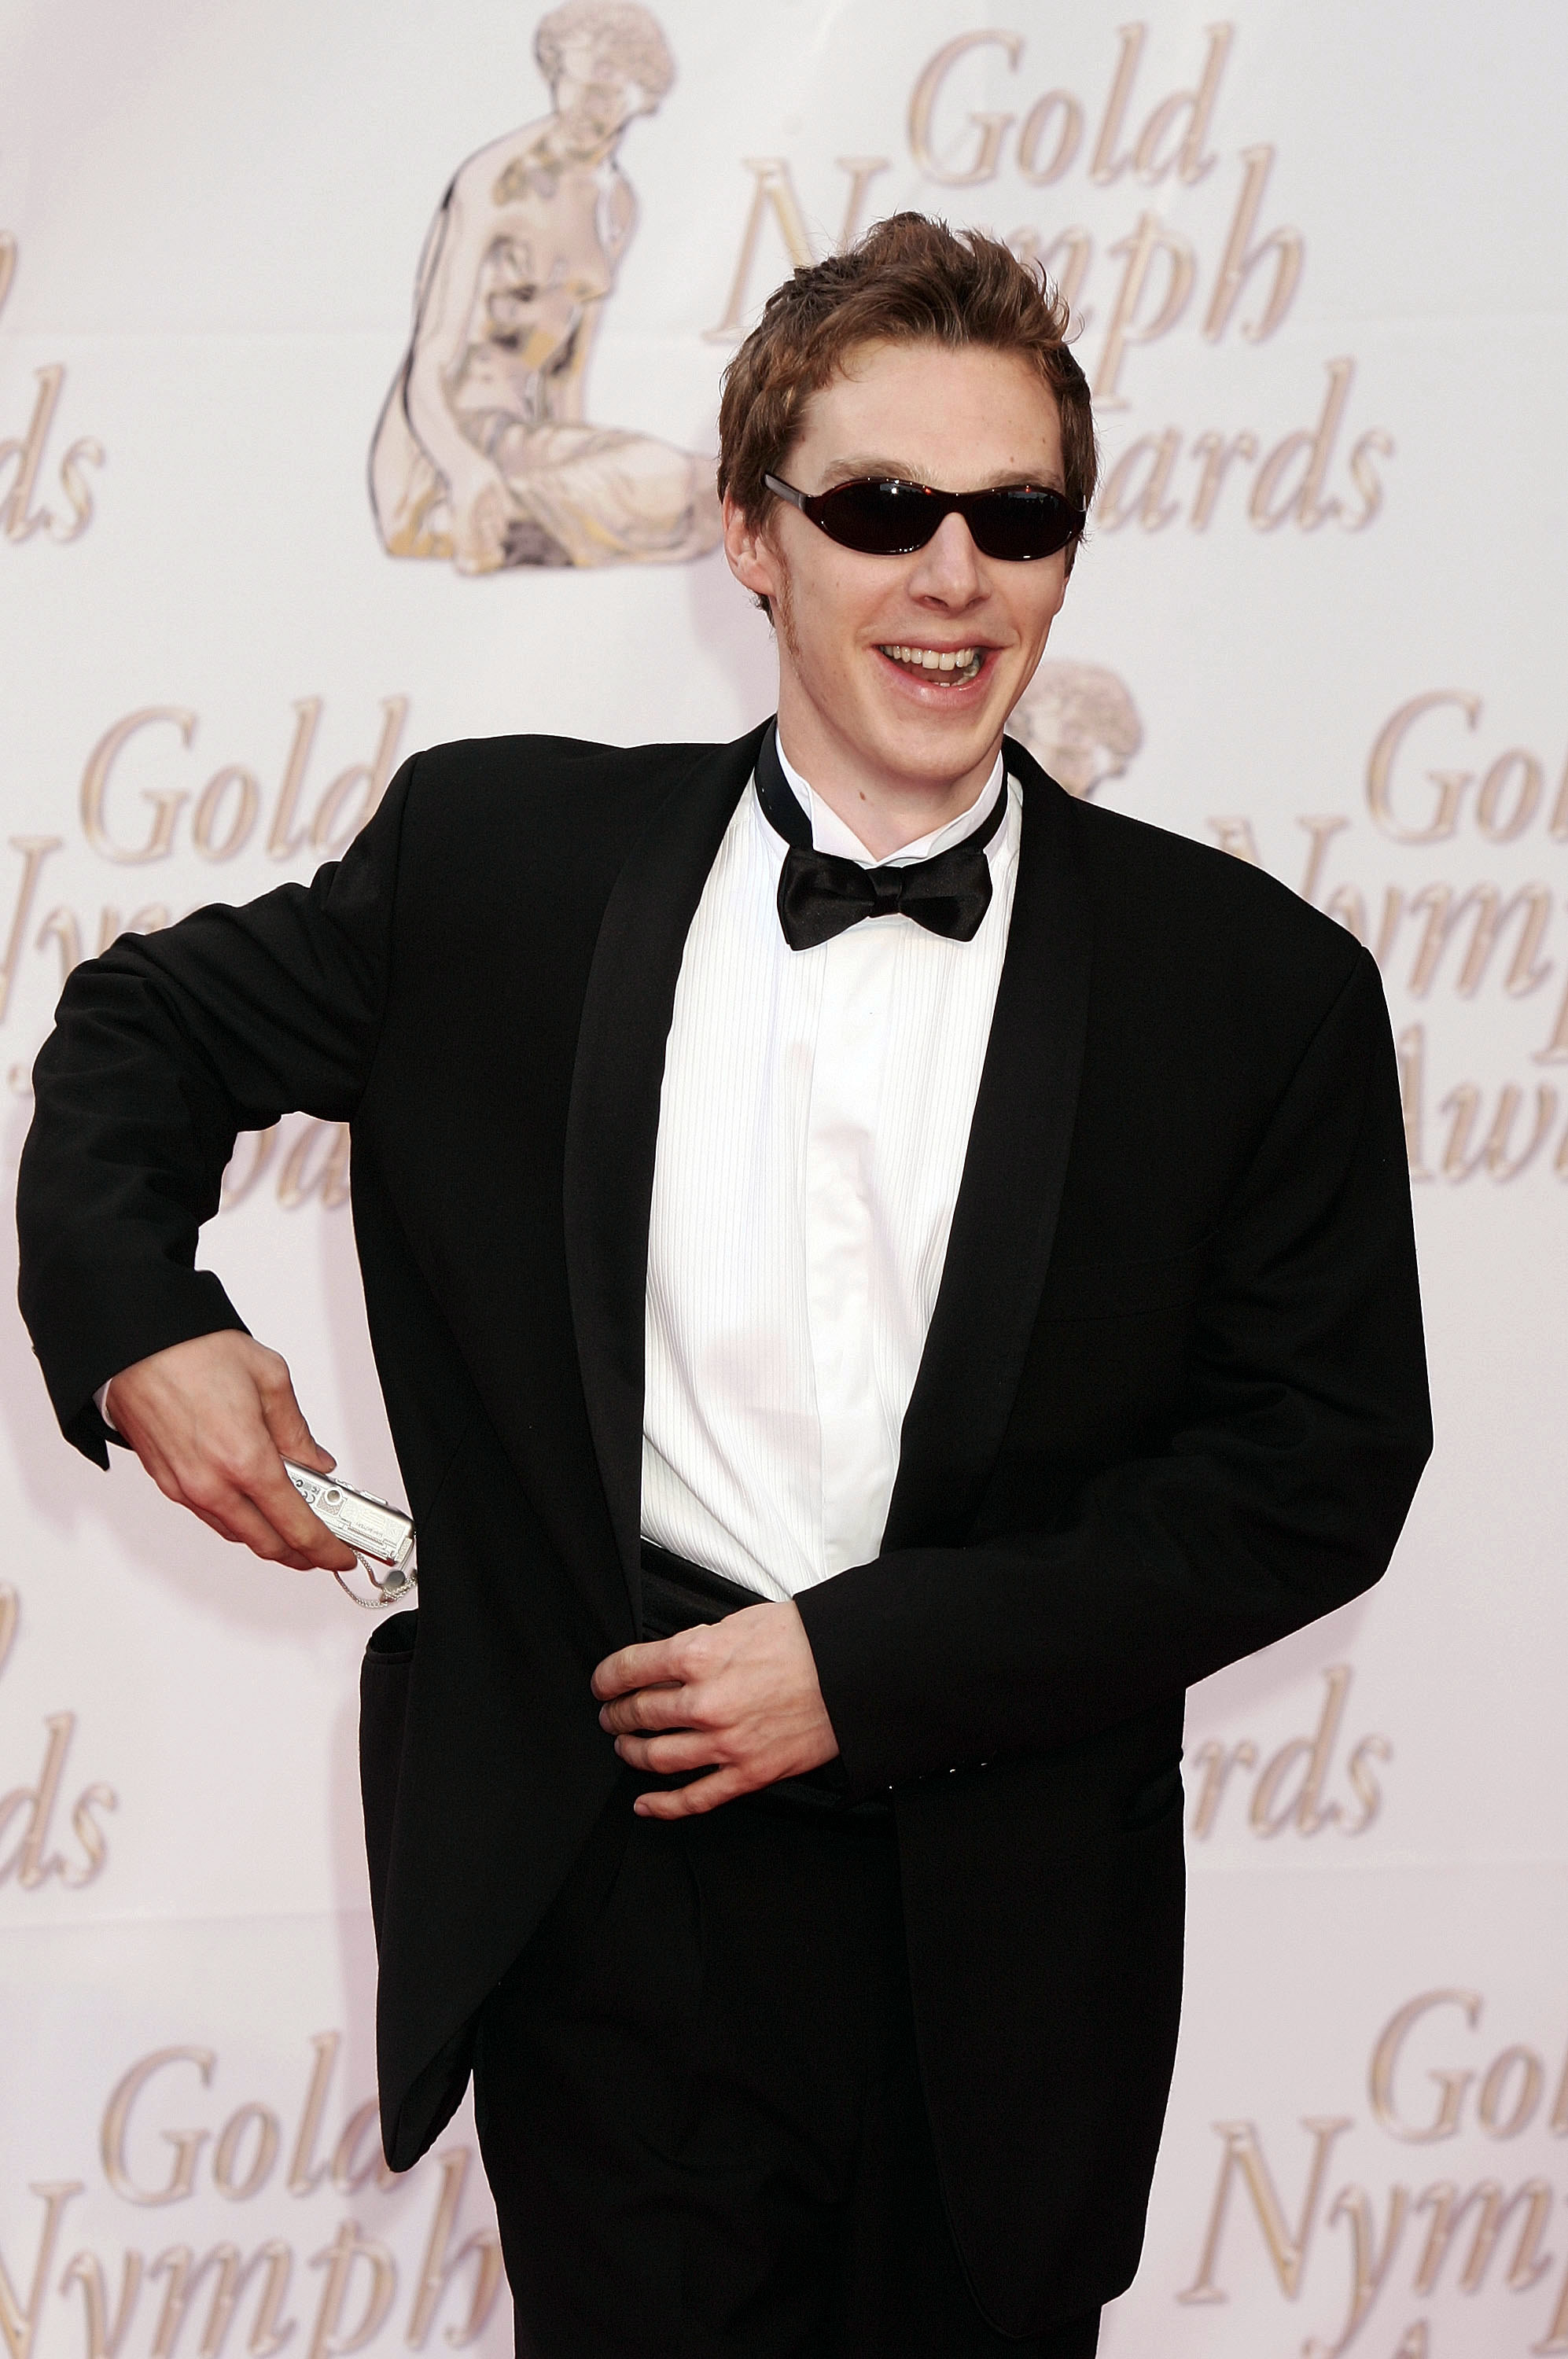 a young Cumberbatch wearing a suit and sunglasses at an event